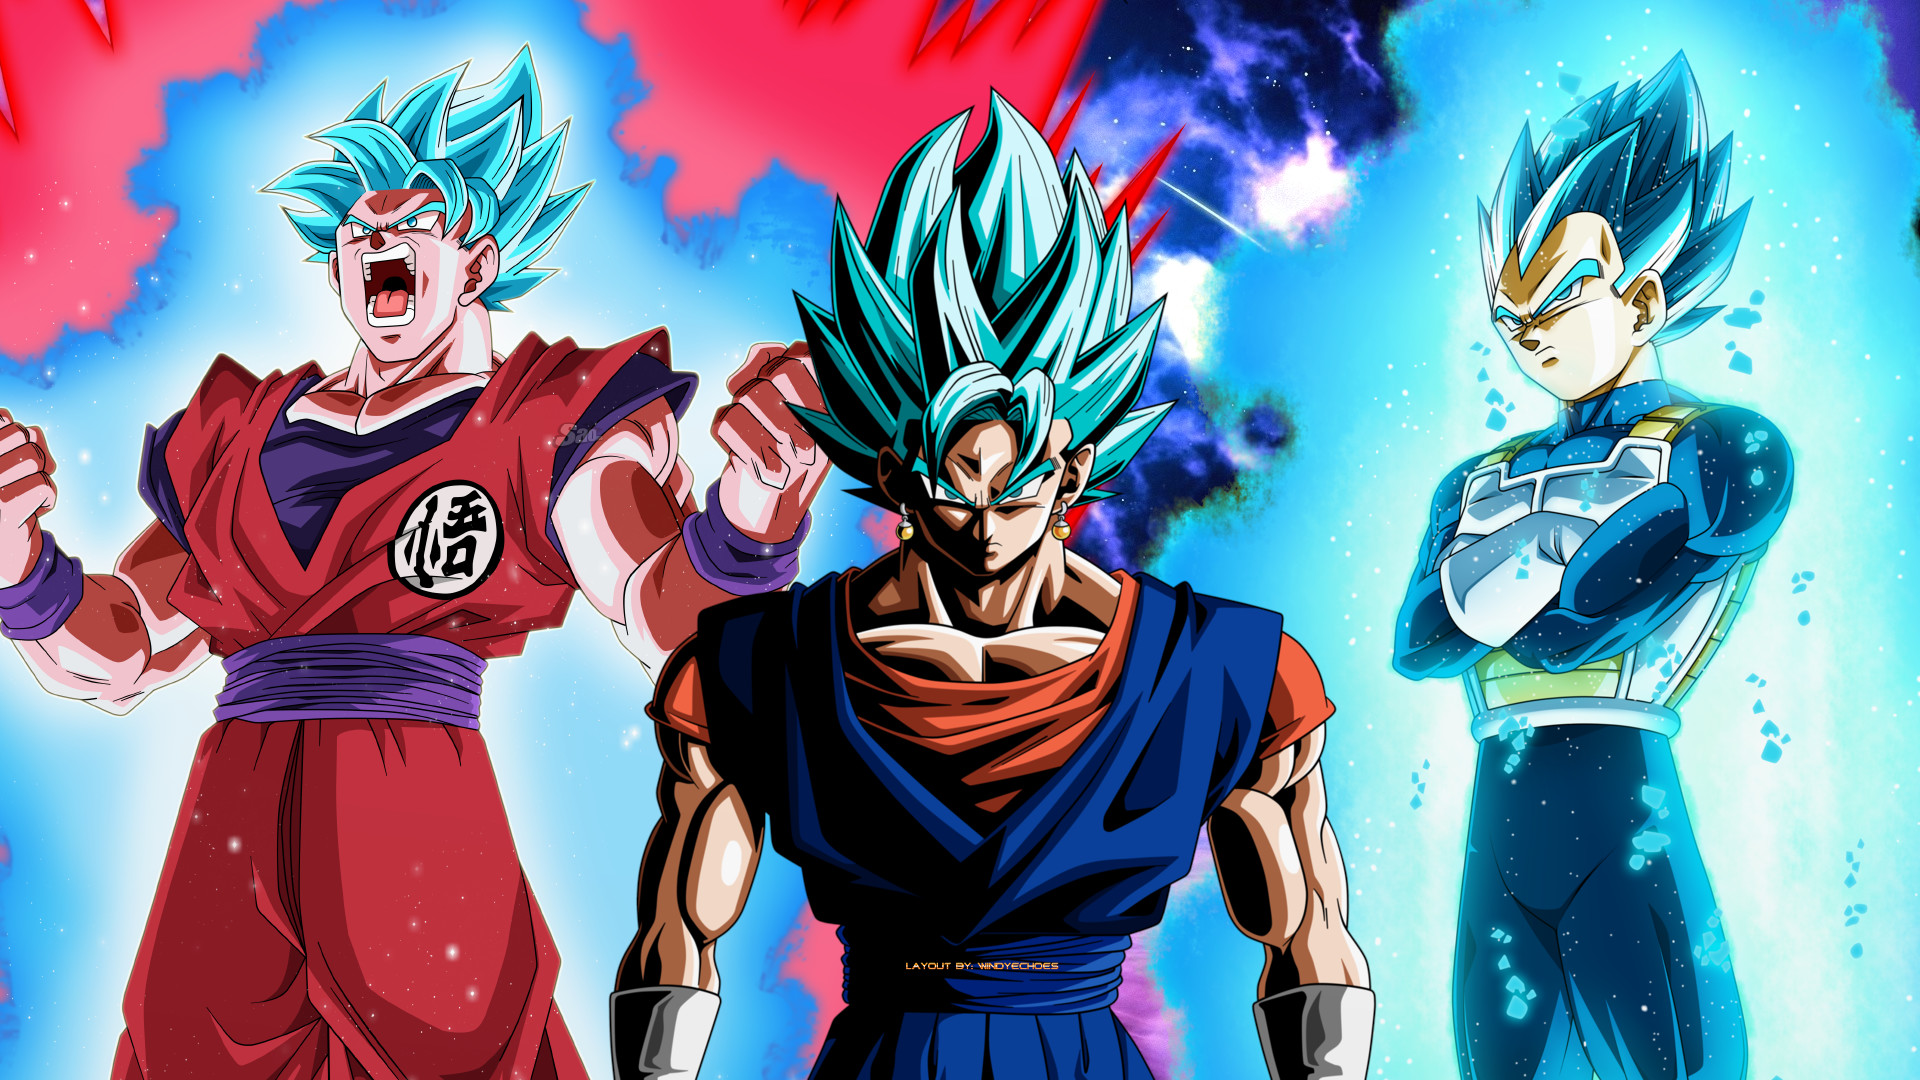 30 Vegito Wallpapers for iPhone and Android by Michael Hamilton